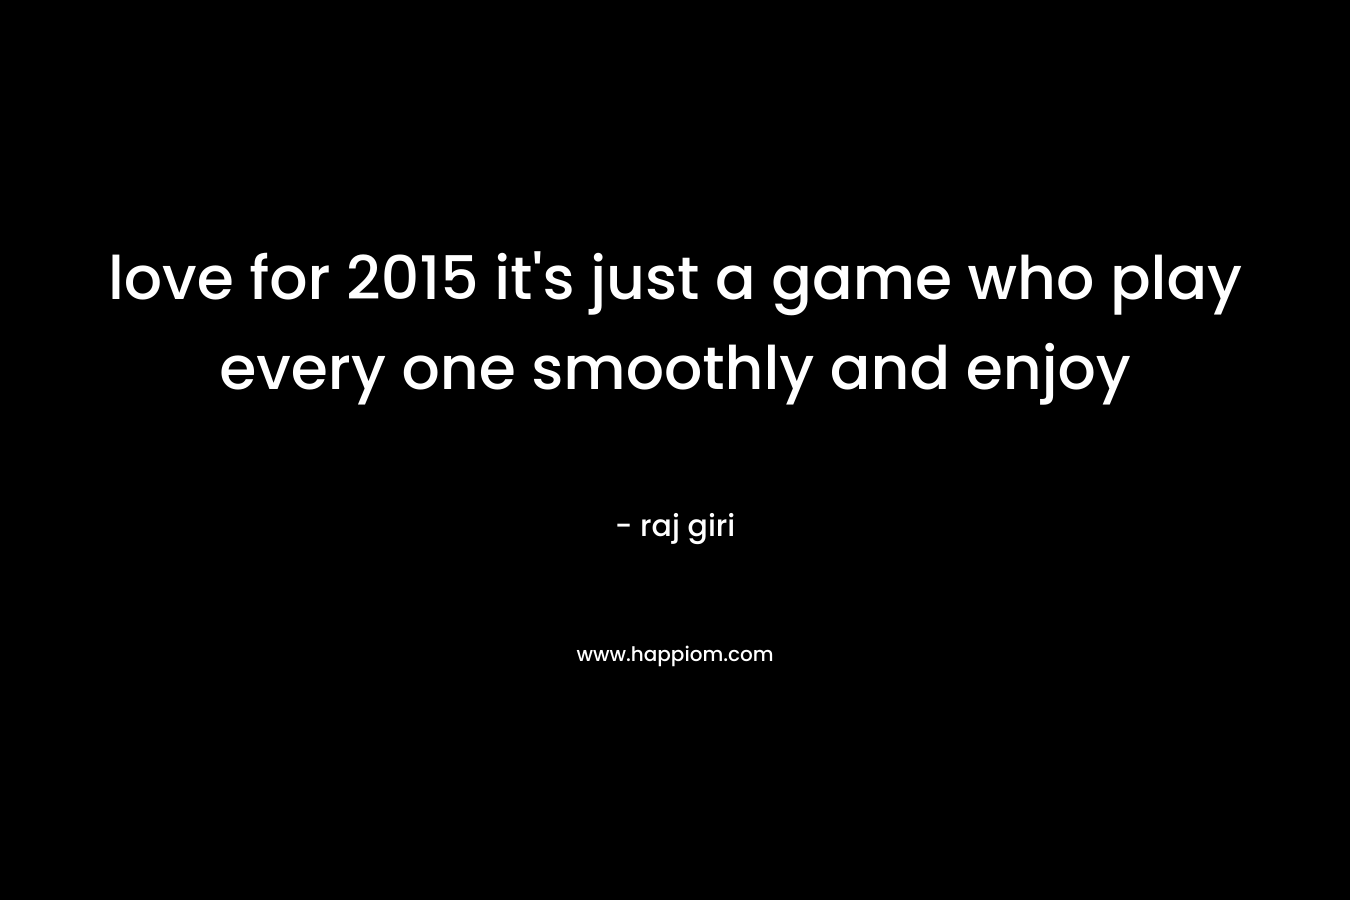 love for 2015 it's just a game who play every one smoothly and enjoy